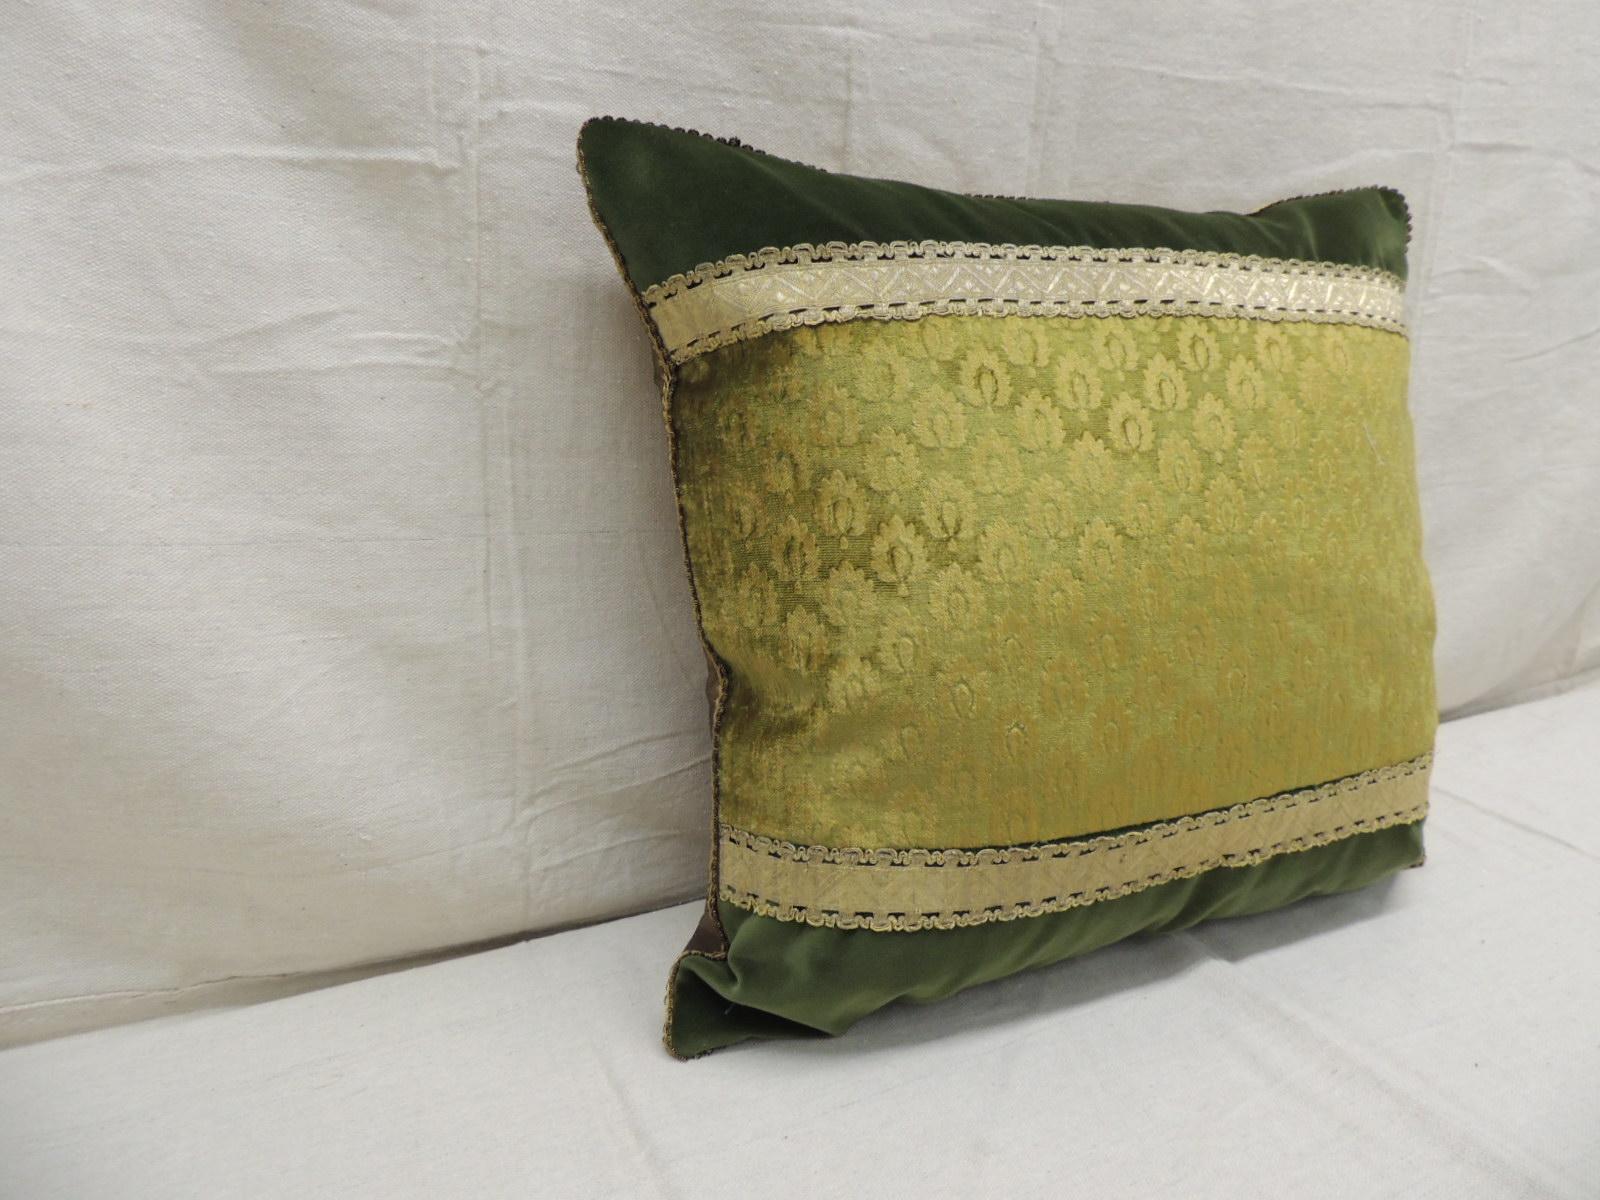 Antique green and gold Gaufrage silk velvet square decorative pillow.
Frame with green velvet and embellished with 19th century
silver woven metallic trim. Small decorative gimp all around and golden silk backing.
Decorative pillow handcrafted